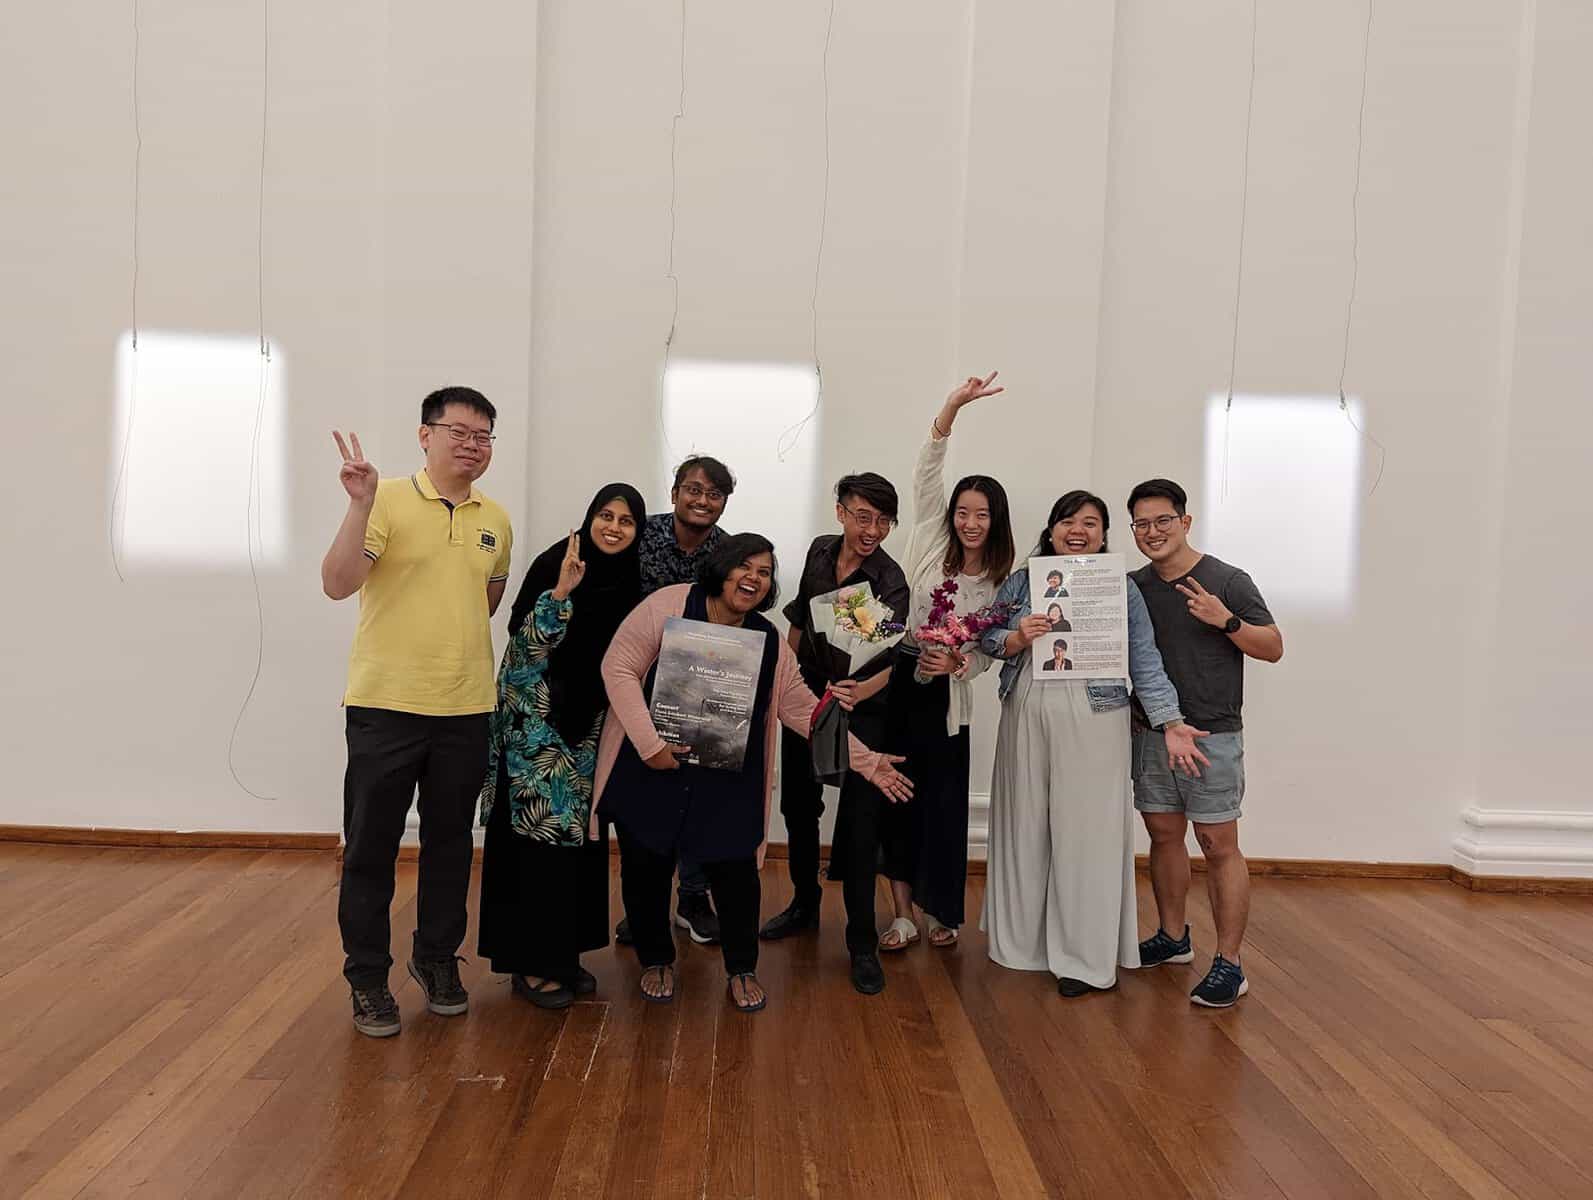 Jireh Koh (in the centre, holding a bouquet) with collaborators from VocaSong Ensemble, Solace Art Psychotherapy, and volunteers from the LASALLE College of the Arts MA Art Therapy programme